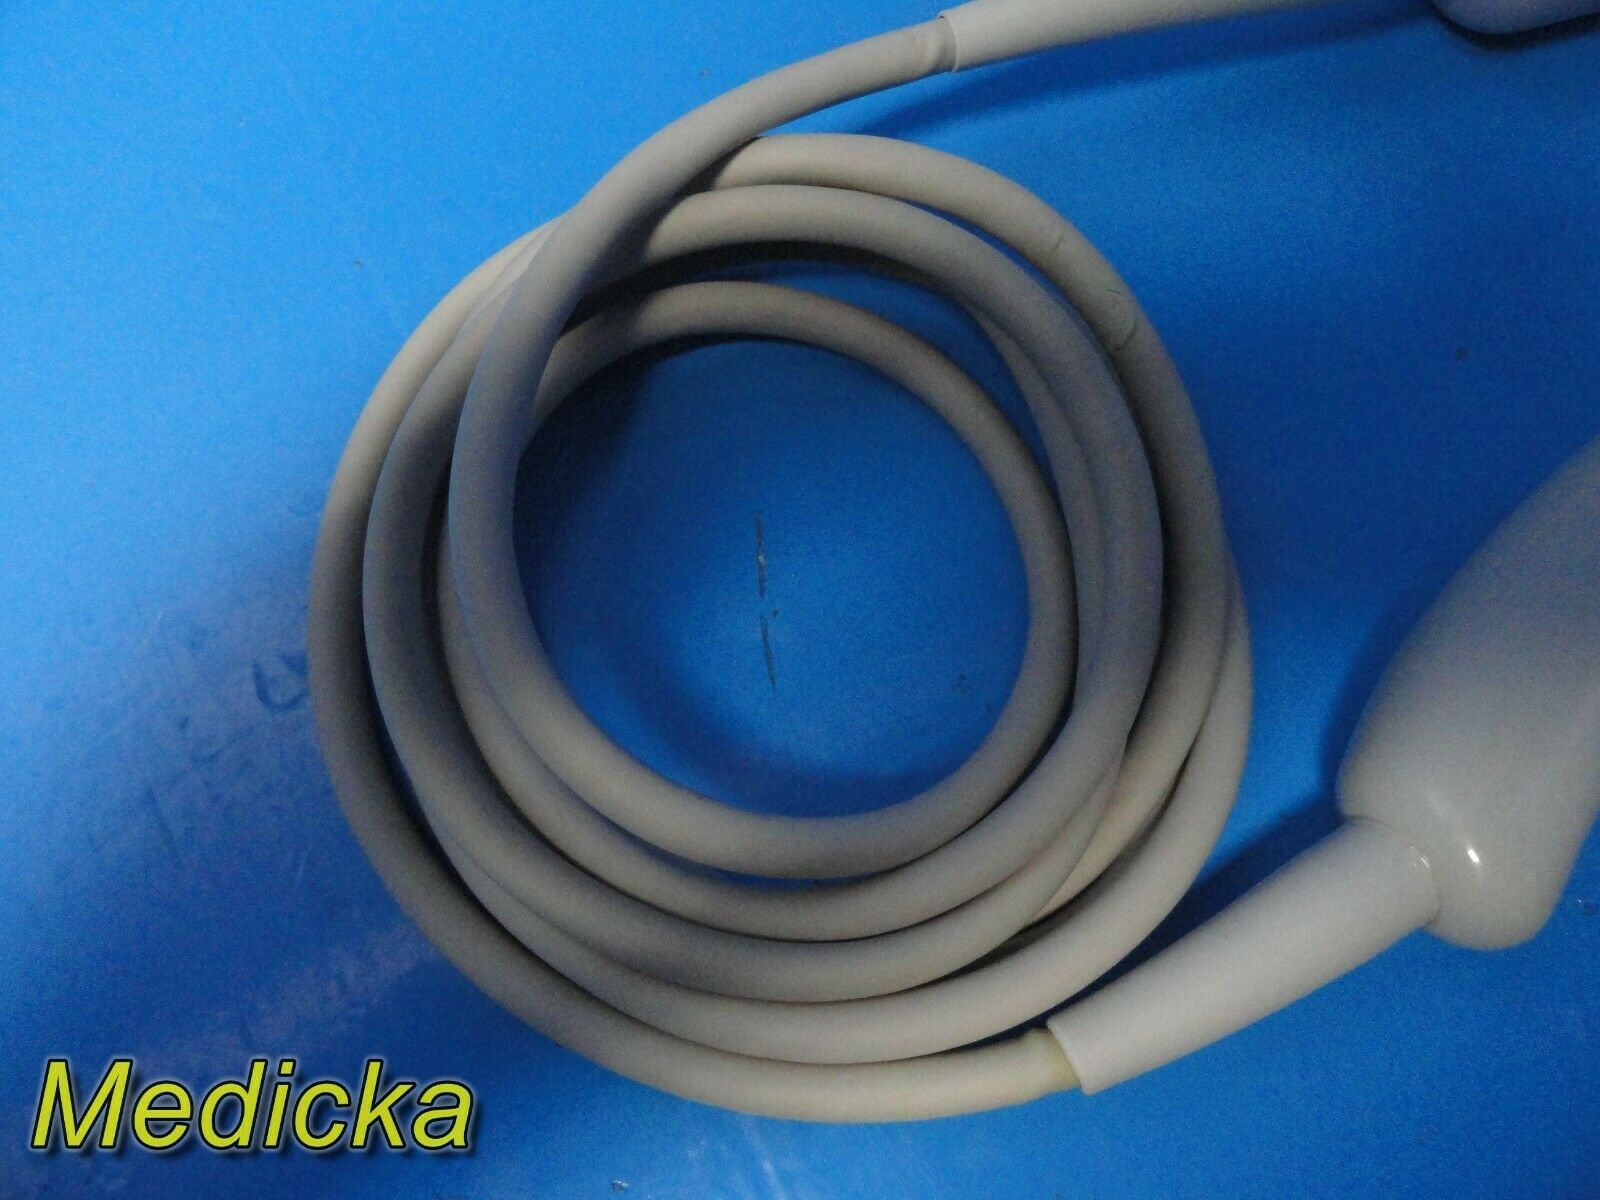 Philips E7014 (21307B) Endocavity/Endovaginal Ultrasound Transducer Probe ~21919 DIAGNOSTIC ULTRASOUND MACHINES FOR SALE